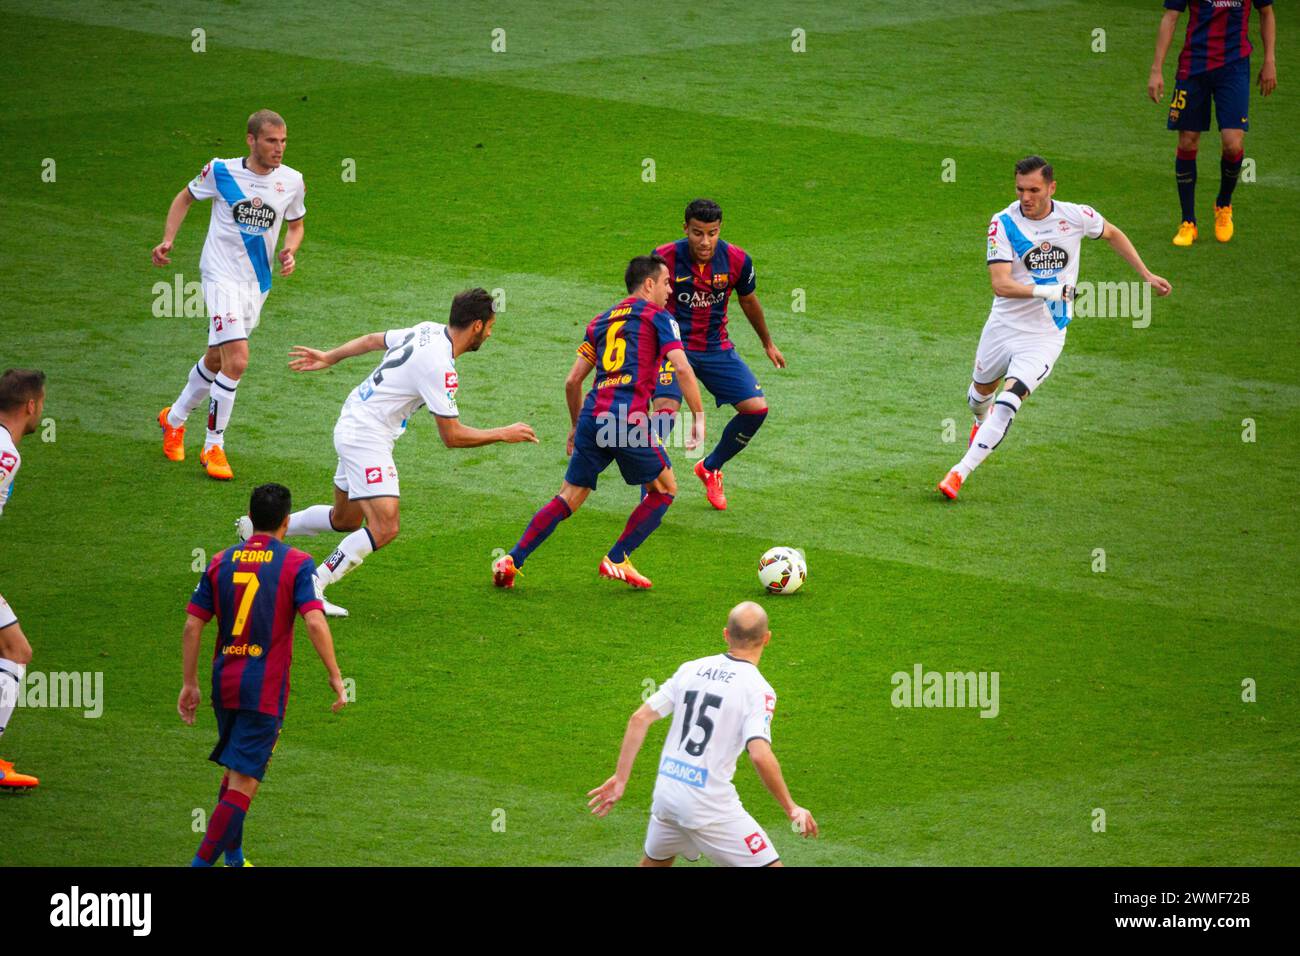 XAVI, FAREWELL GAME, BARCELONA FC, 2015: Xavi Hernandez of Barcelona makes a trademark tiki-taka pass. The final game of the La Liga 2014-15 season in Spain between Barcelona FC and Deportivo de La Coruna at Camp Nou, Barcelona on May 23 2015. The Game finished 2-2. Barcelona celebrated winning the championship title and legend Xavi's final home game. Deportiva got the point they needed to avoid relegation. Photograph: Rob Watkins Stock Photo